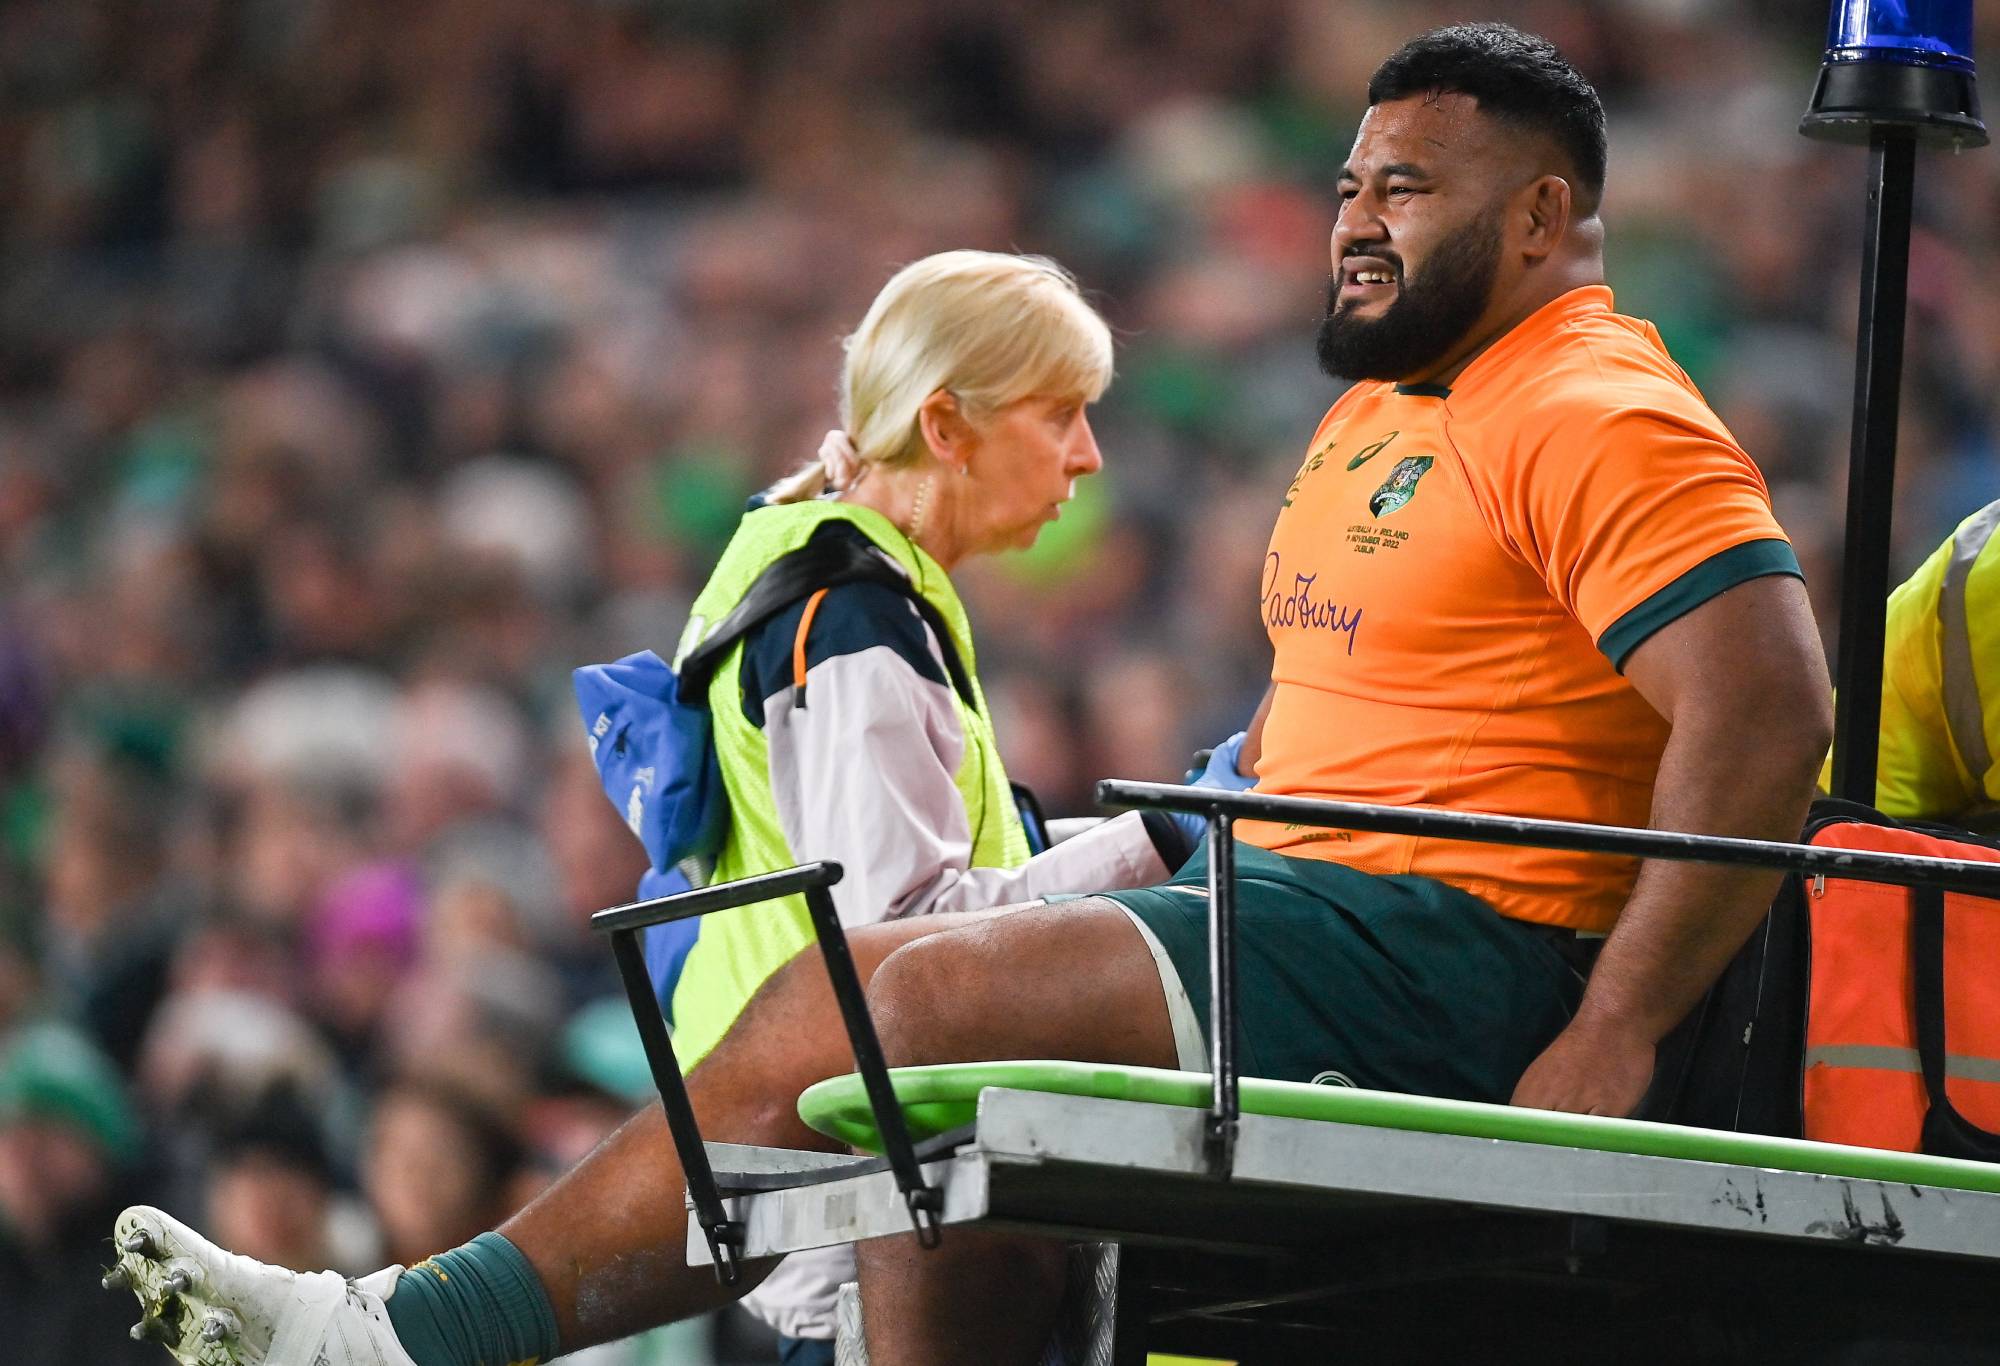 Taniela Tupou of Australia is taken from the pitch to receive medial attention during the Bank of Ireland Nations Series match between Ireland and Australia at the Aviva Stadium in Dublin. (Photo By Ramsey Cardy/Sportsfile via Getty Images)